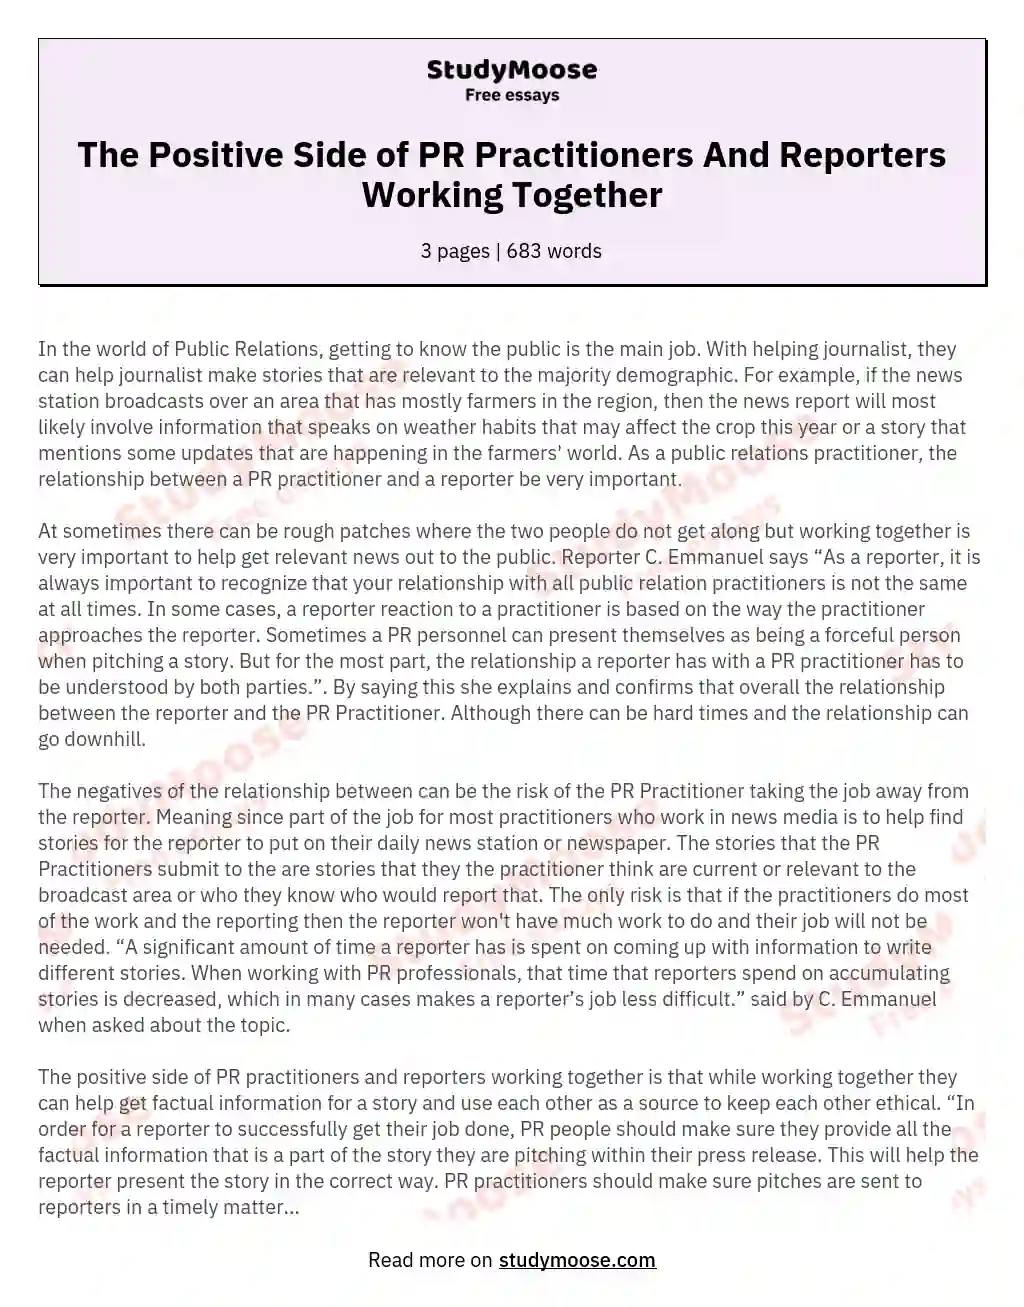 The Positive Side of PR Practitioners And Reporters Working Together essay